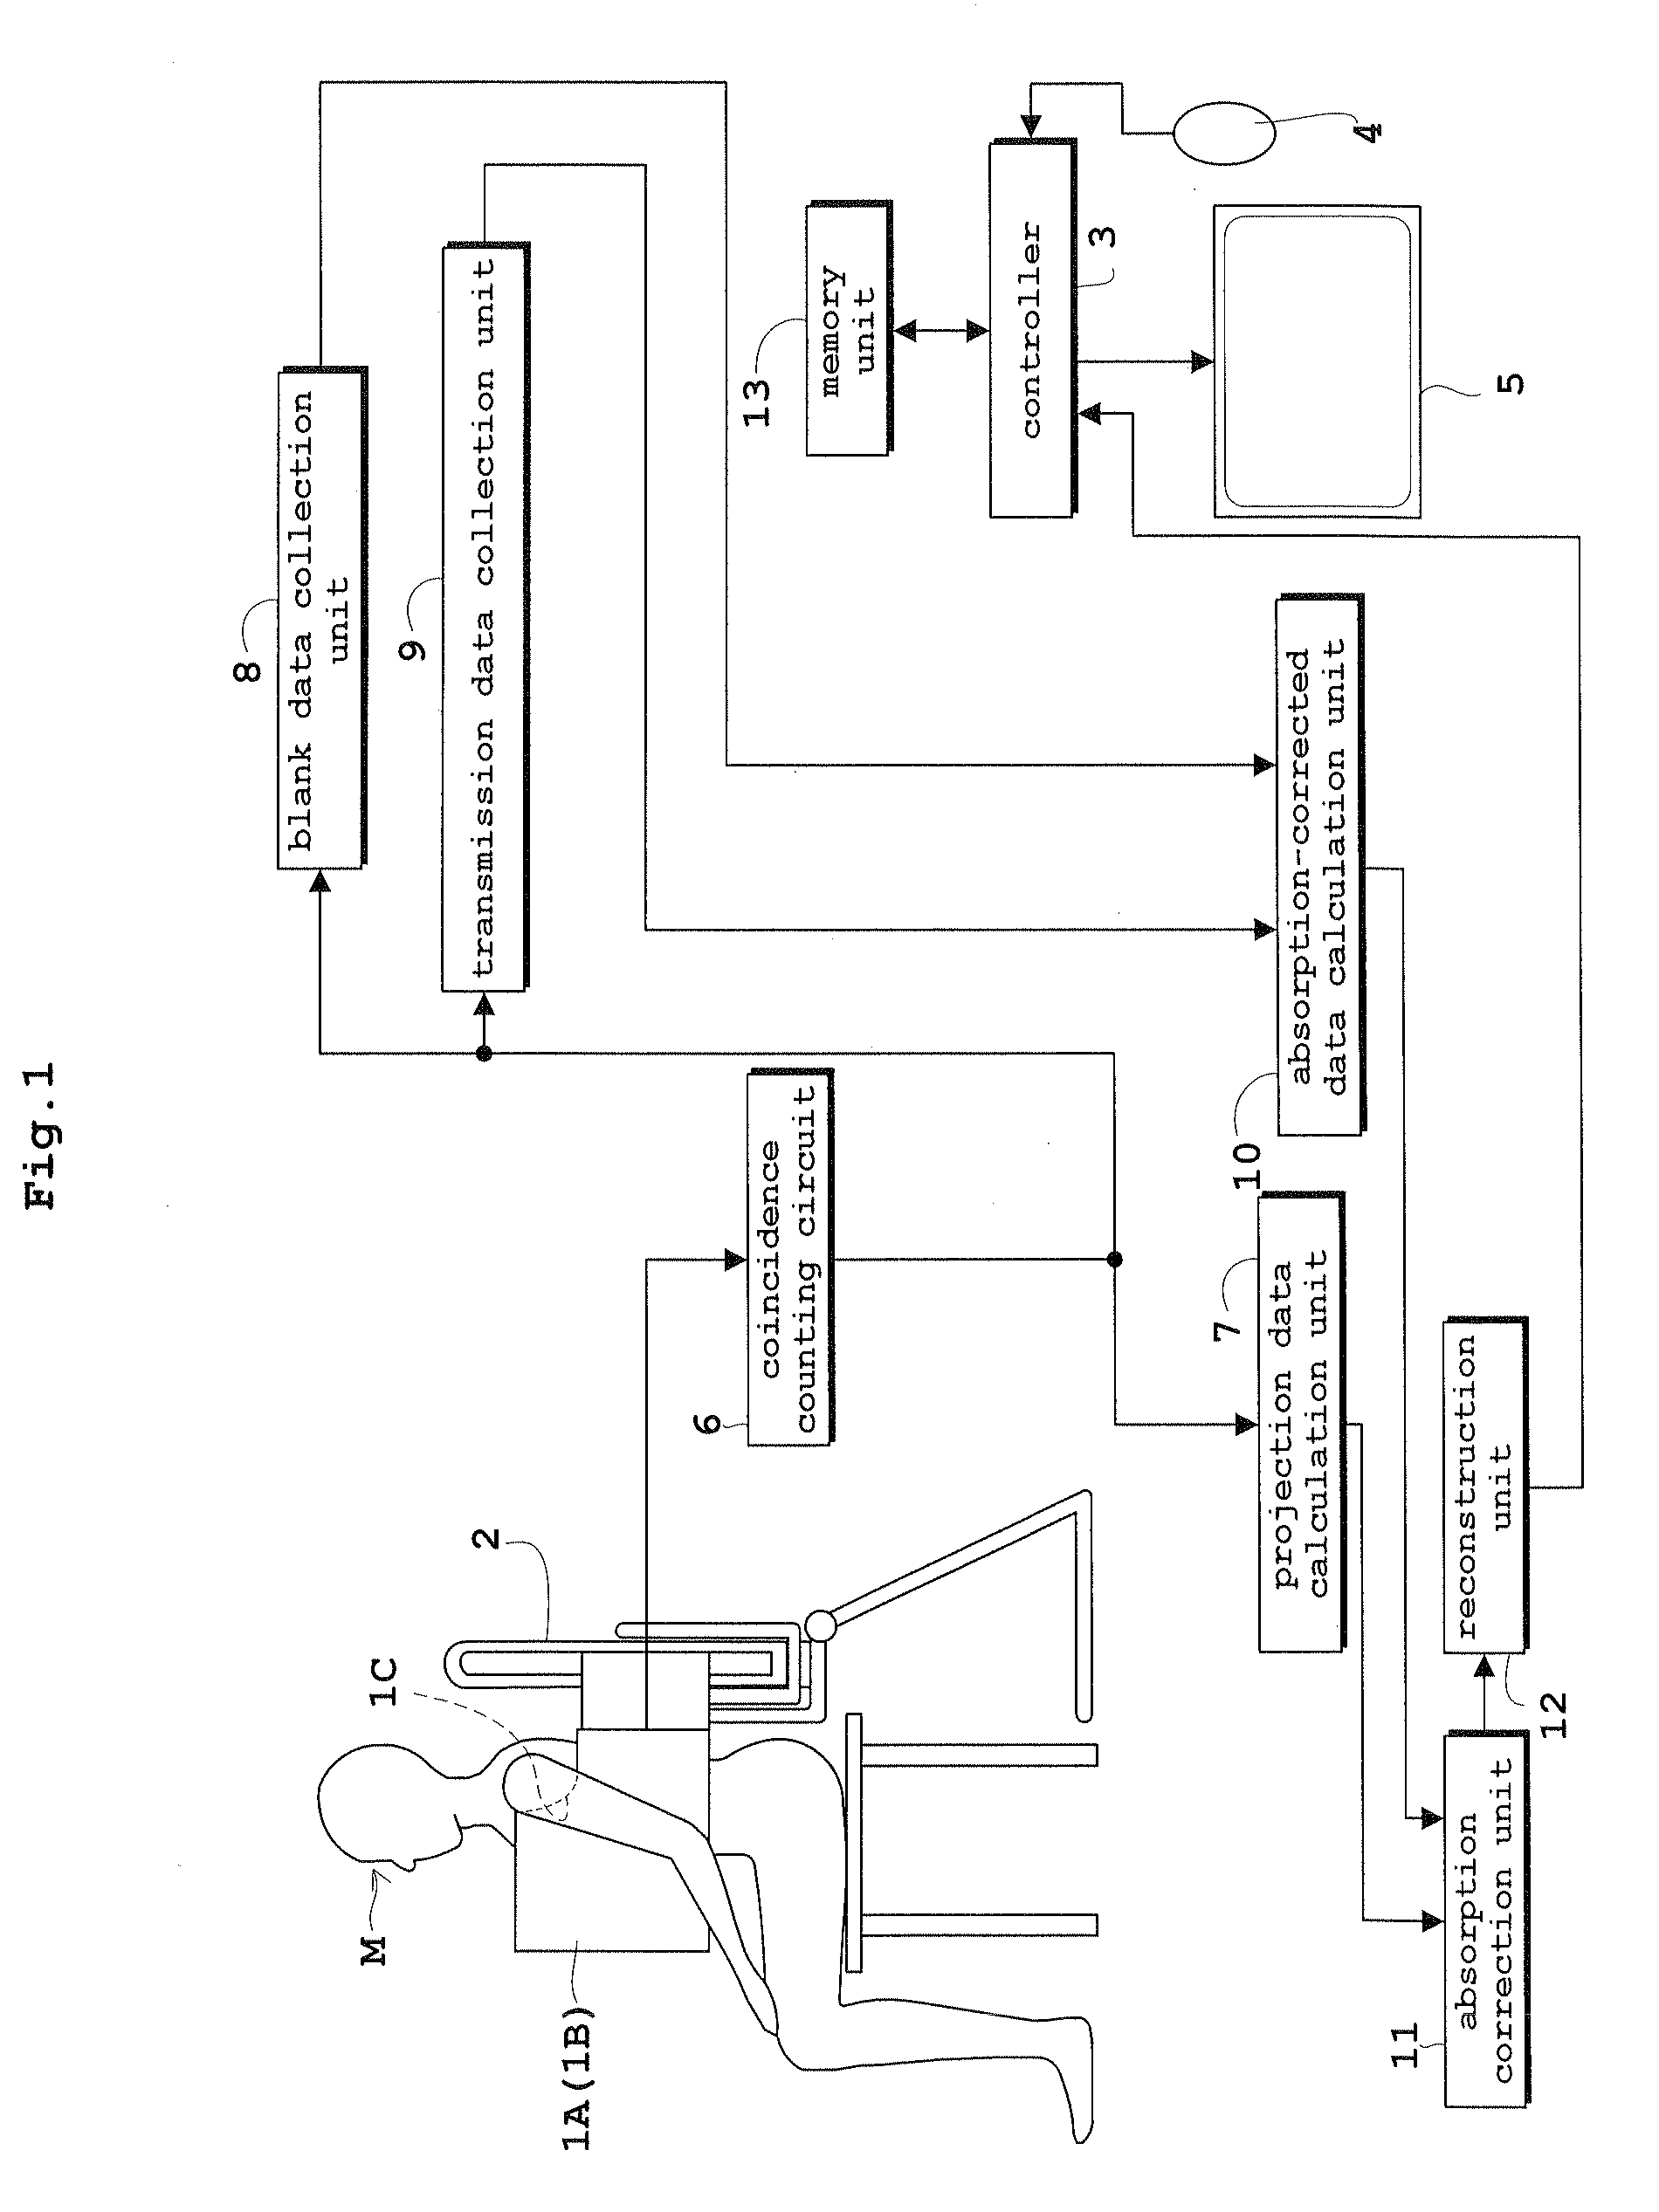 Nuclear medicine diagnosis device, form tomography diagnosis device, nuclear medicine data arithmetic processing method, and form tomogram arithmetic processing method